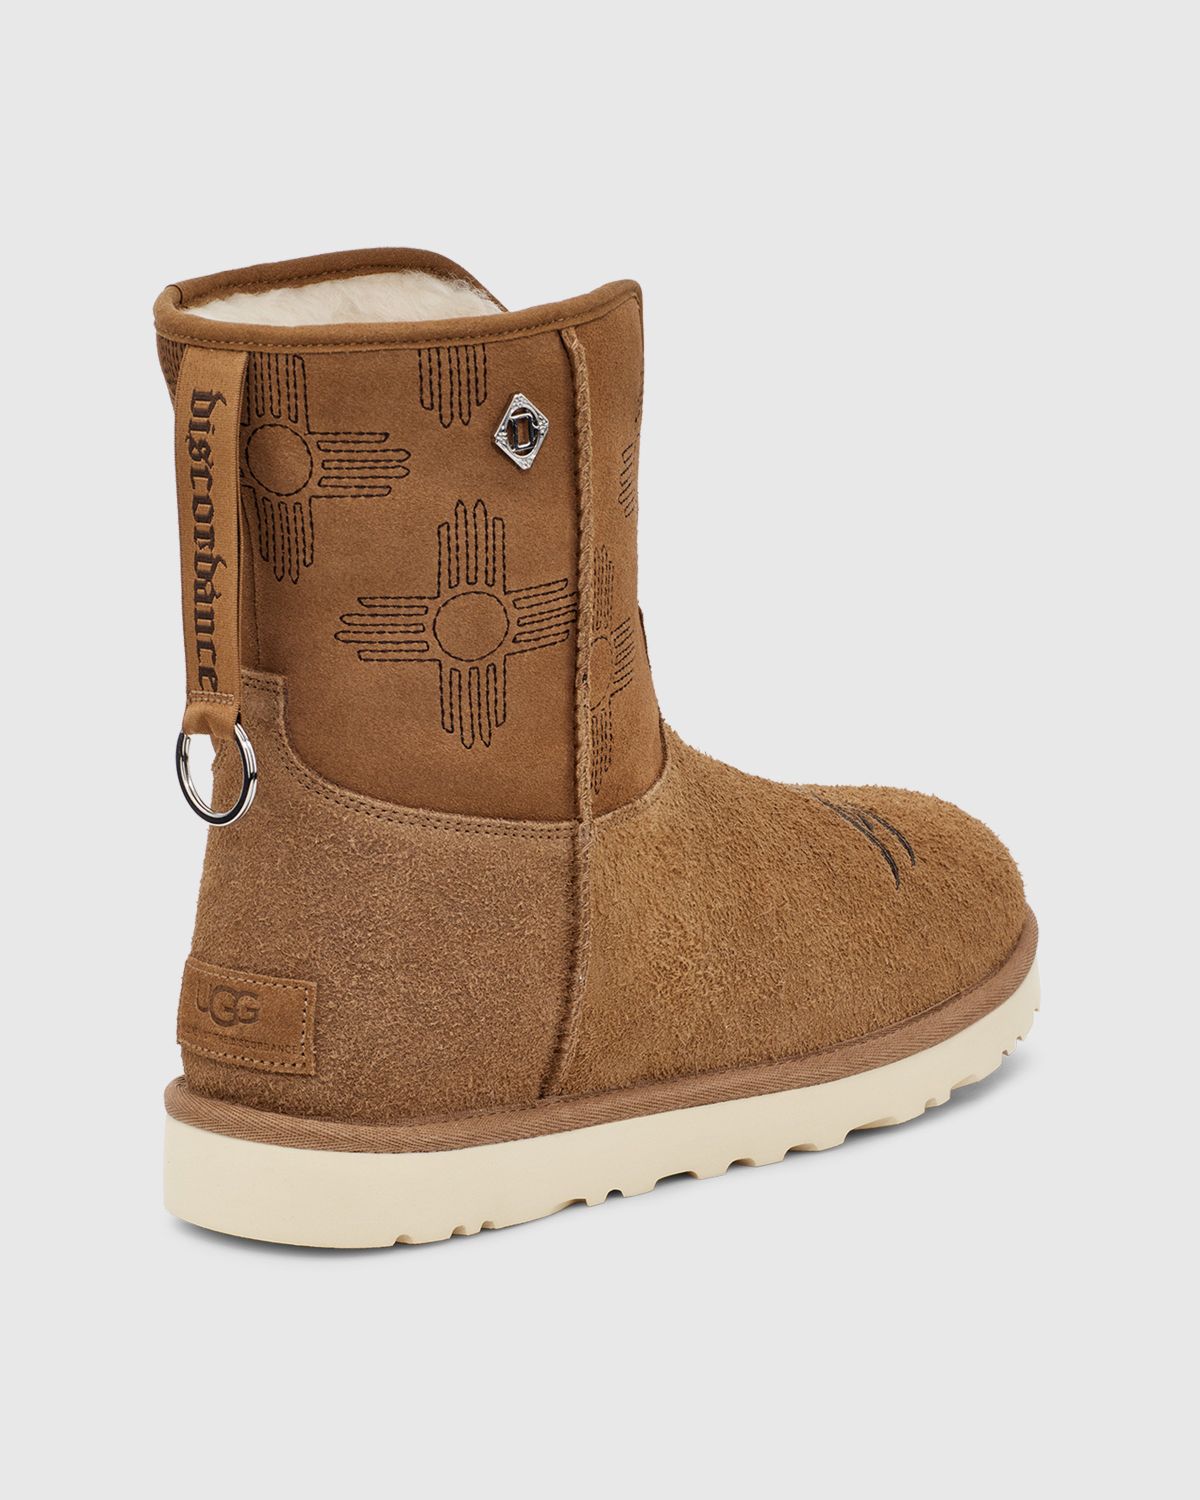 Ugg x Children of the Discordance – Classic Short Boot Brown - Lined Boots - Brown - Image 4